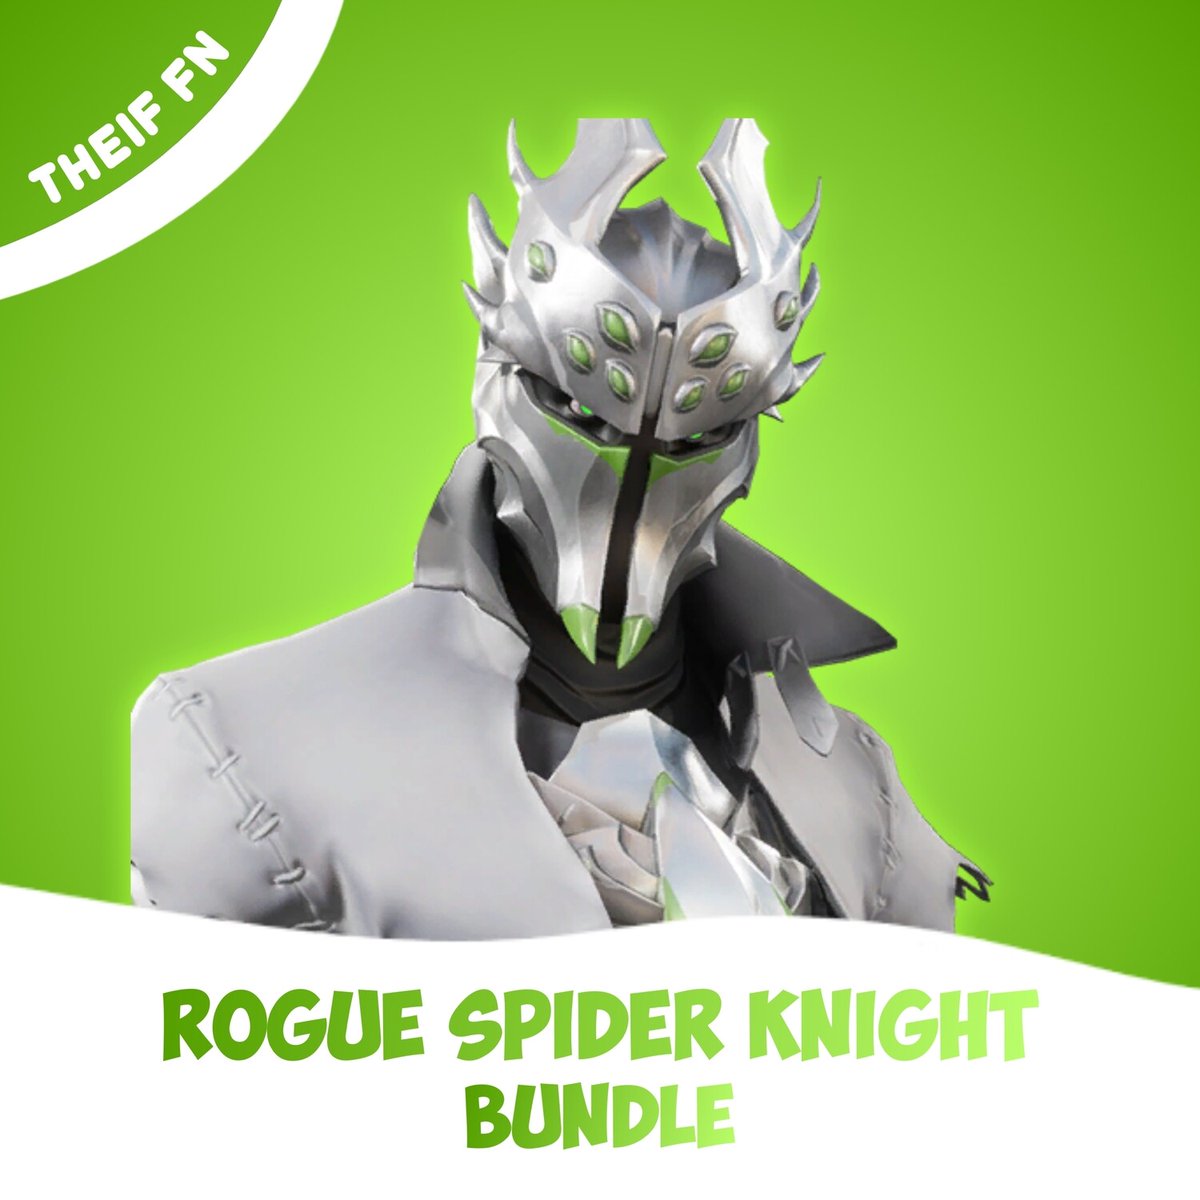 Rouge Spider Knight Giveaway 
Follow me 
RT & Like Good luck
Ends in 48hrs